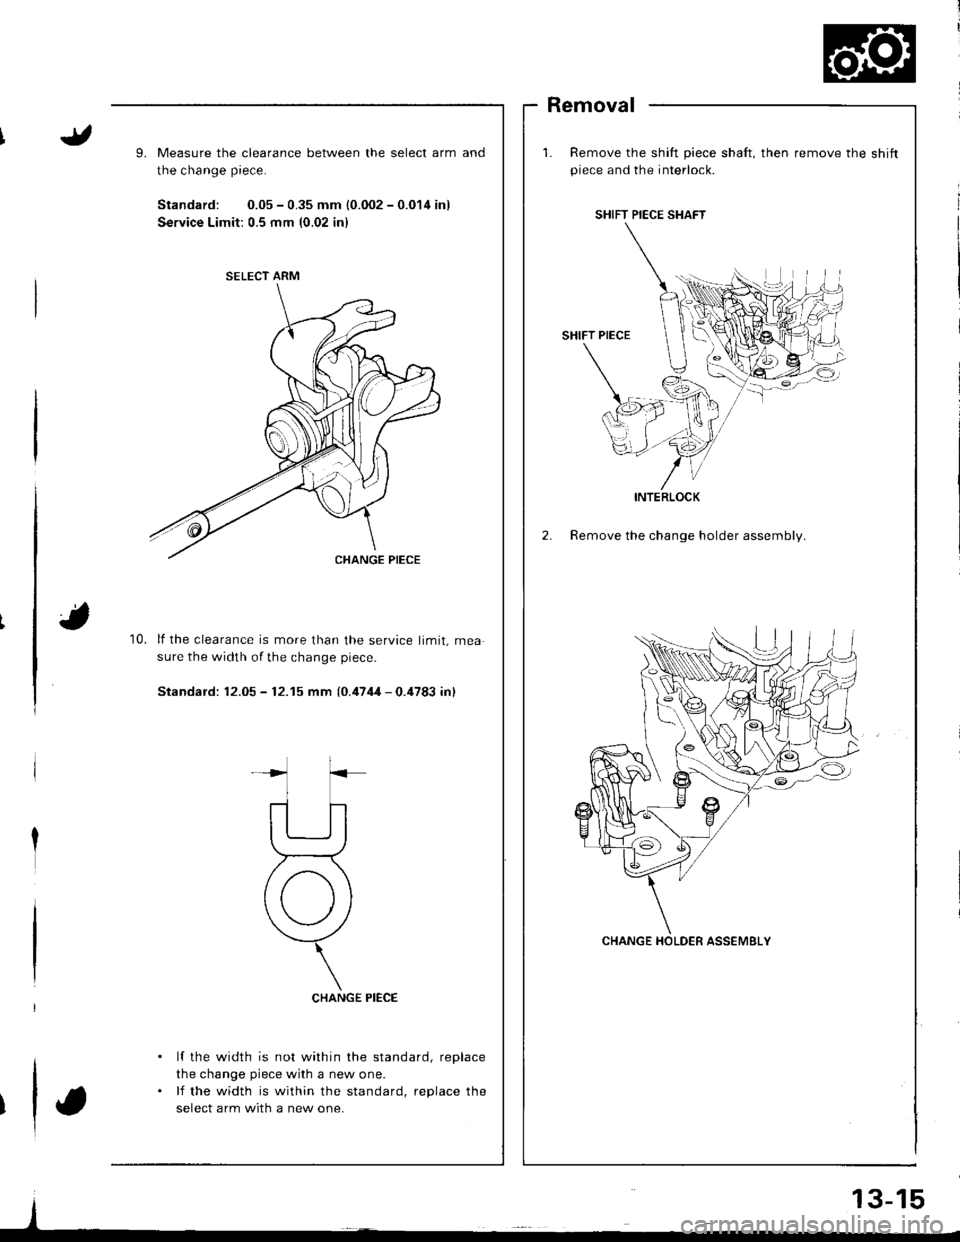 HONDA INTEGRA 1998 4.G Workshop Manual 9.Measure the clearance between the select arm
the change piece.
Standard: 0.05 - 0.35 mm {0.002 - 0.014 in)
Service Limit: 0.5 mm {0.02 inl
Removal
Remove the shift piece shaft, then remove the shift